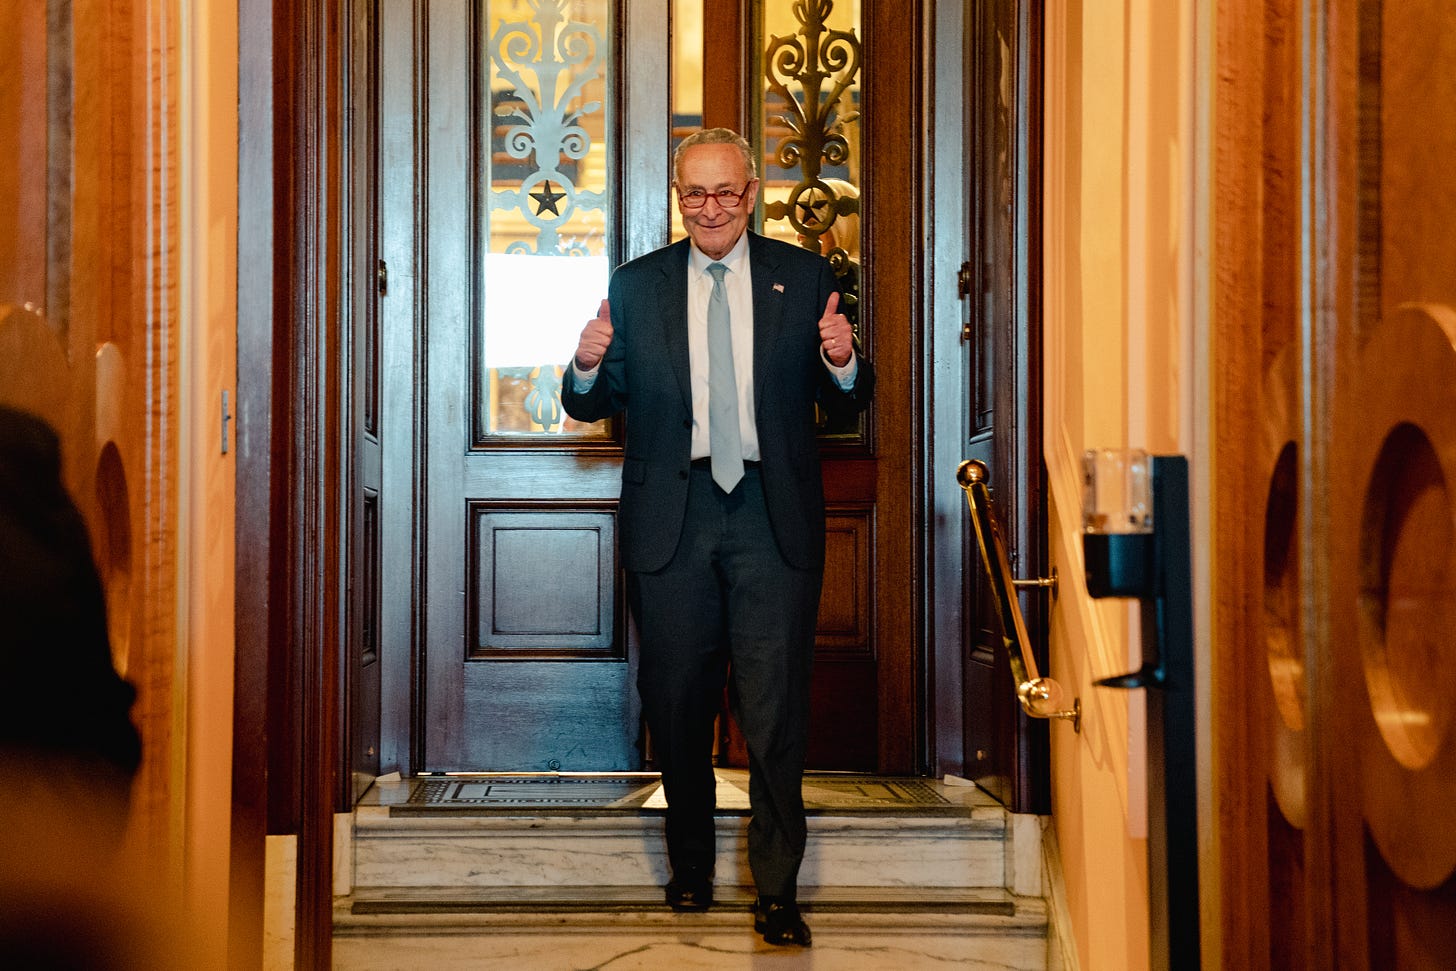 Senate Majority Leader Chuck Schumer (D-NY) gives the thumbs up as he leaves the Senate Chamber after passage of the Inflation Reduction Act on Capitol Hill in Washington, DC on August 7, 2022. (Photo by Shuran Huang for The Washington Post via Getty Images)